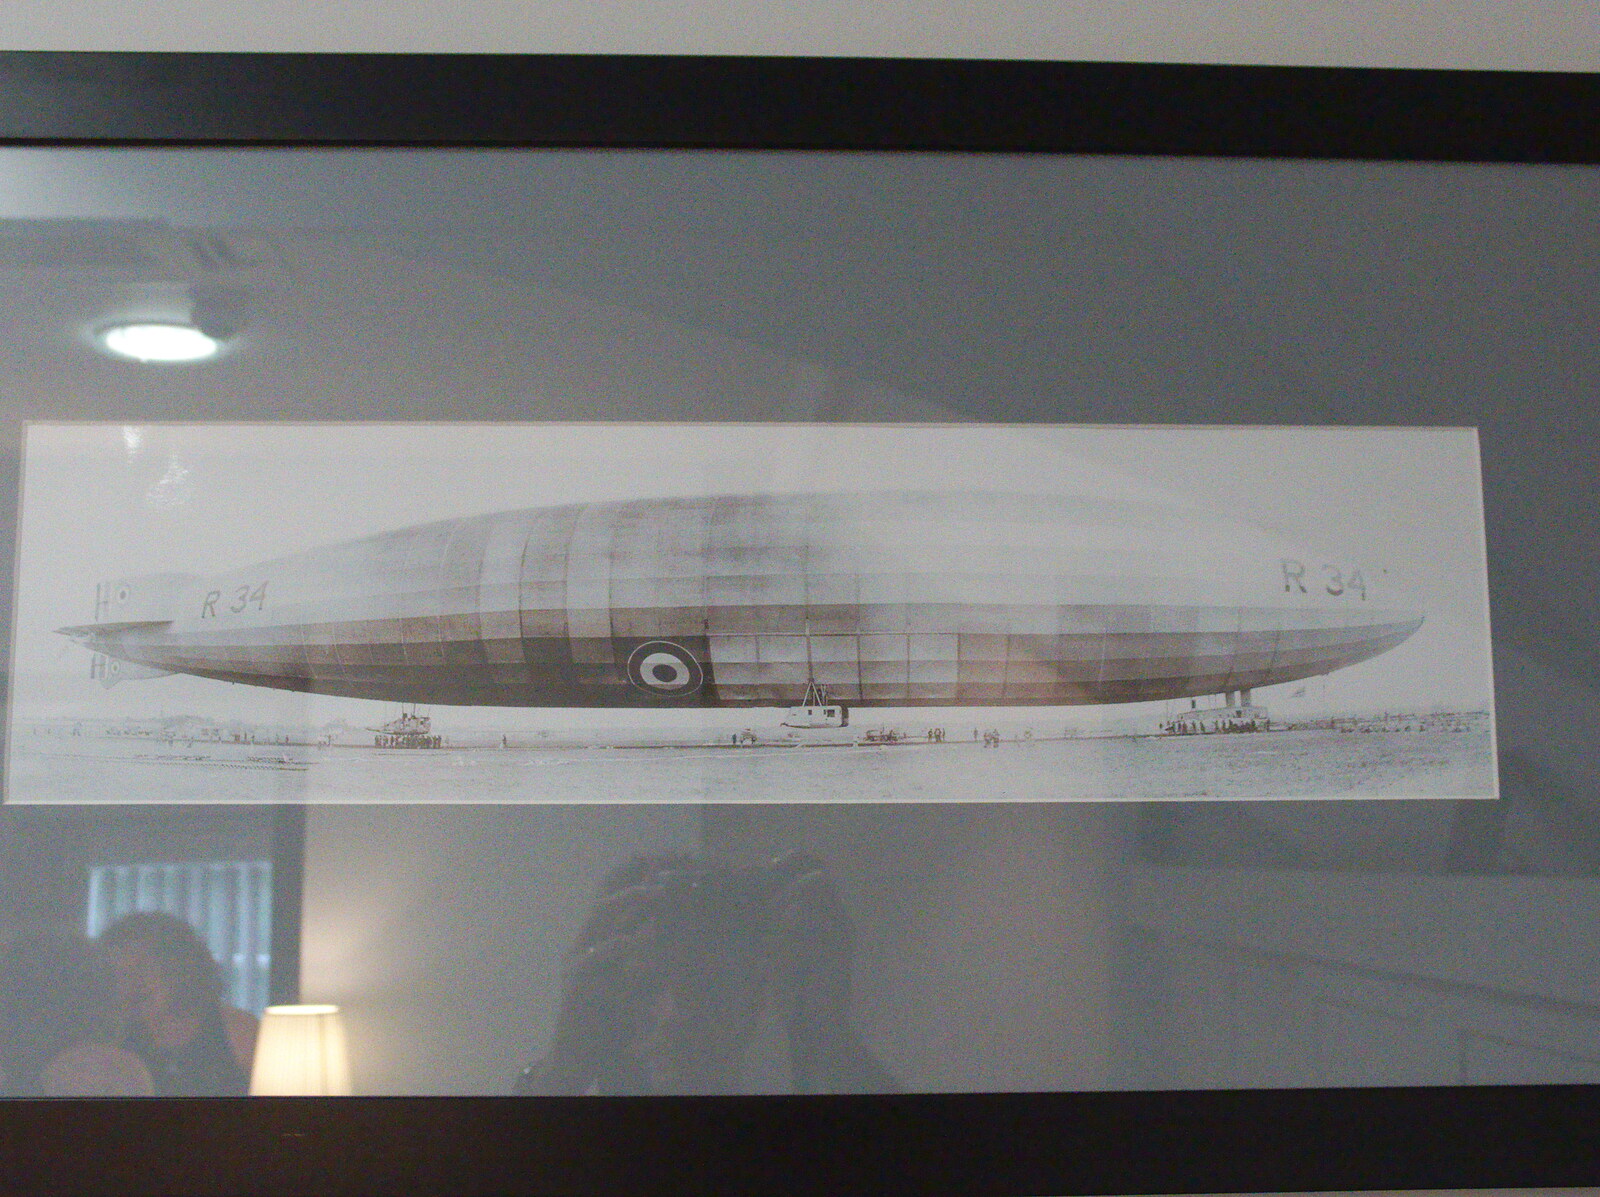 A pitcure of the R34 airship from Railway Hell: A Pantograph Story, Chelmsford, Essex - 17th June 2014